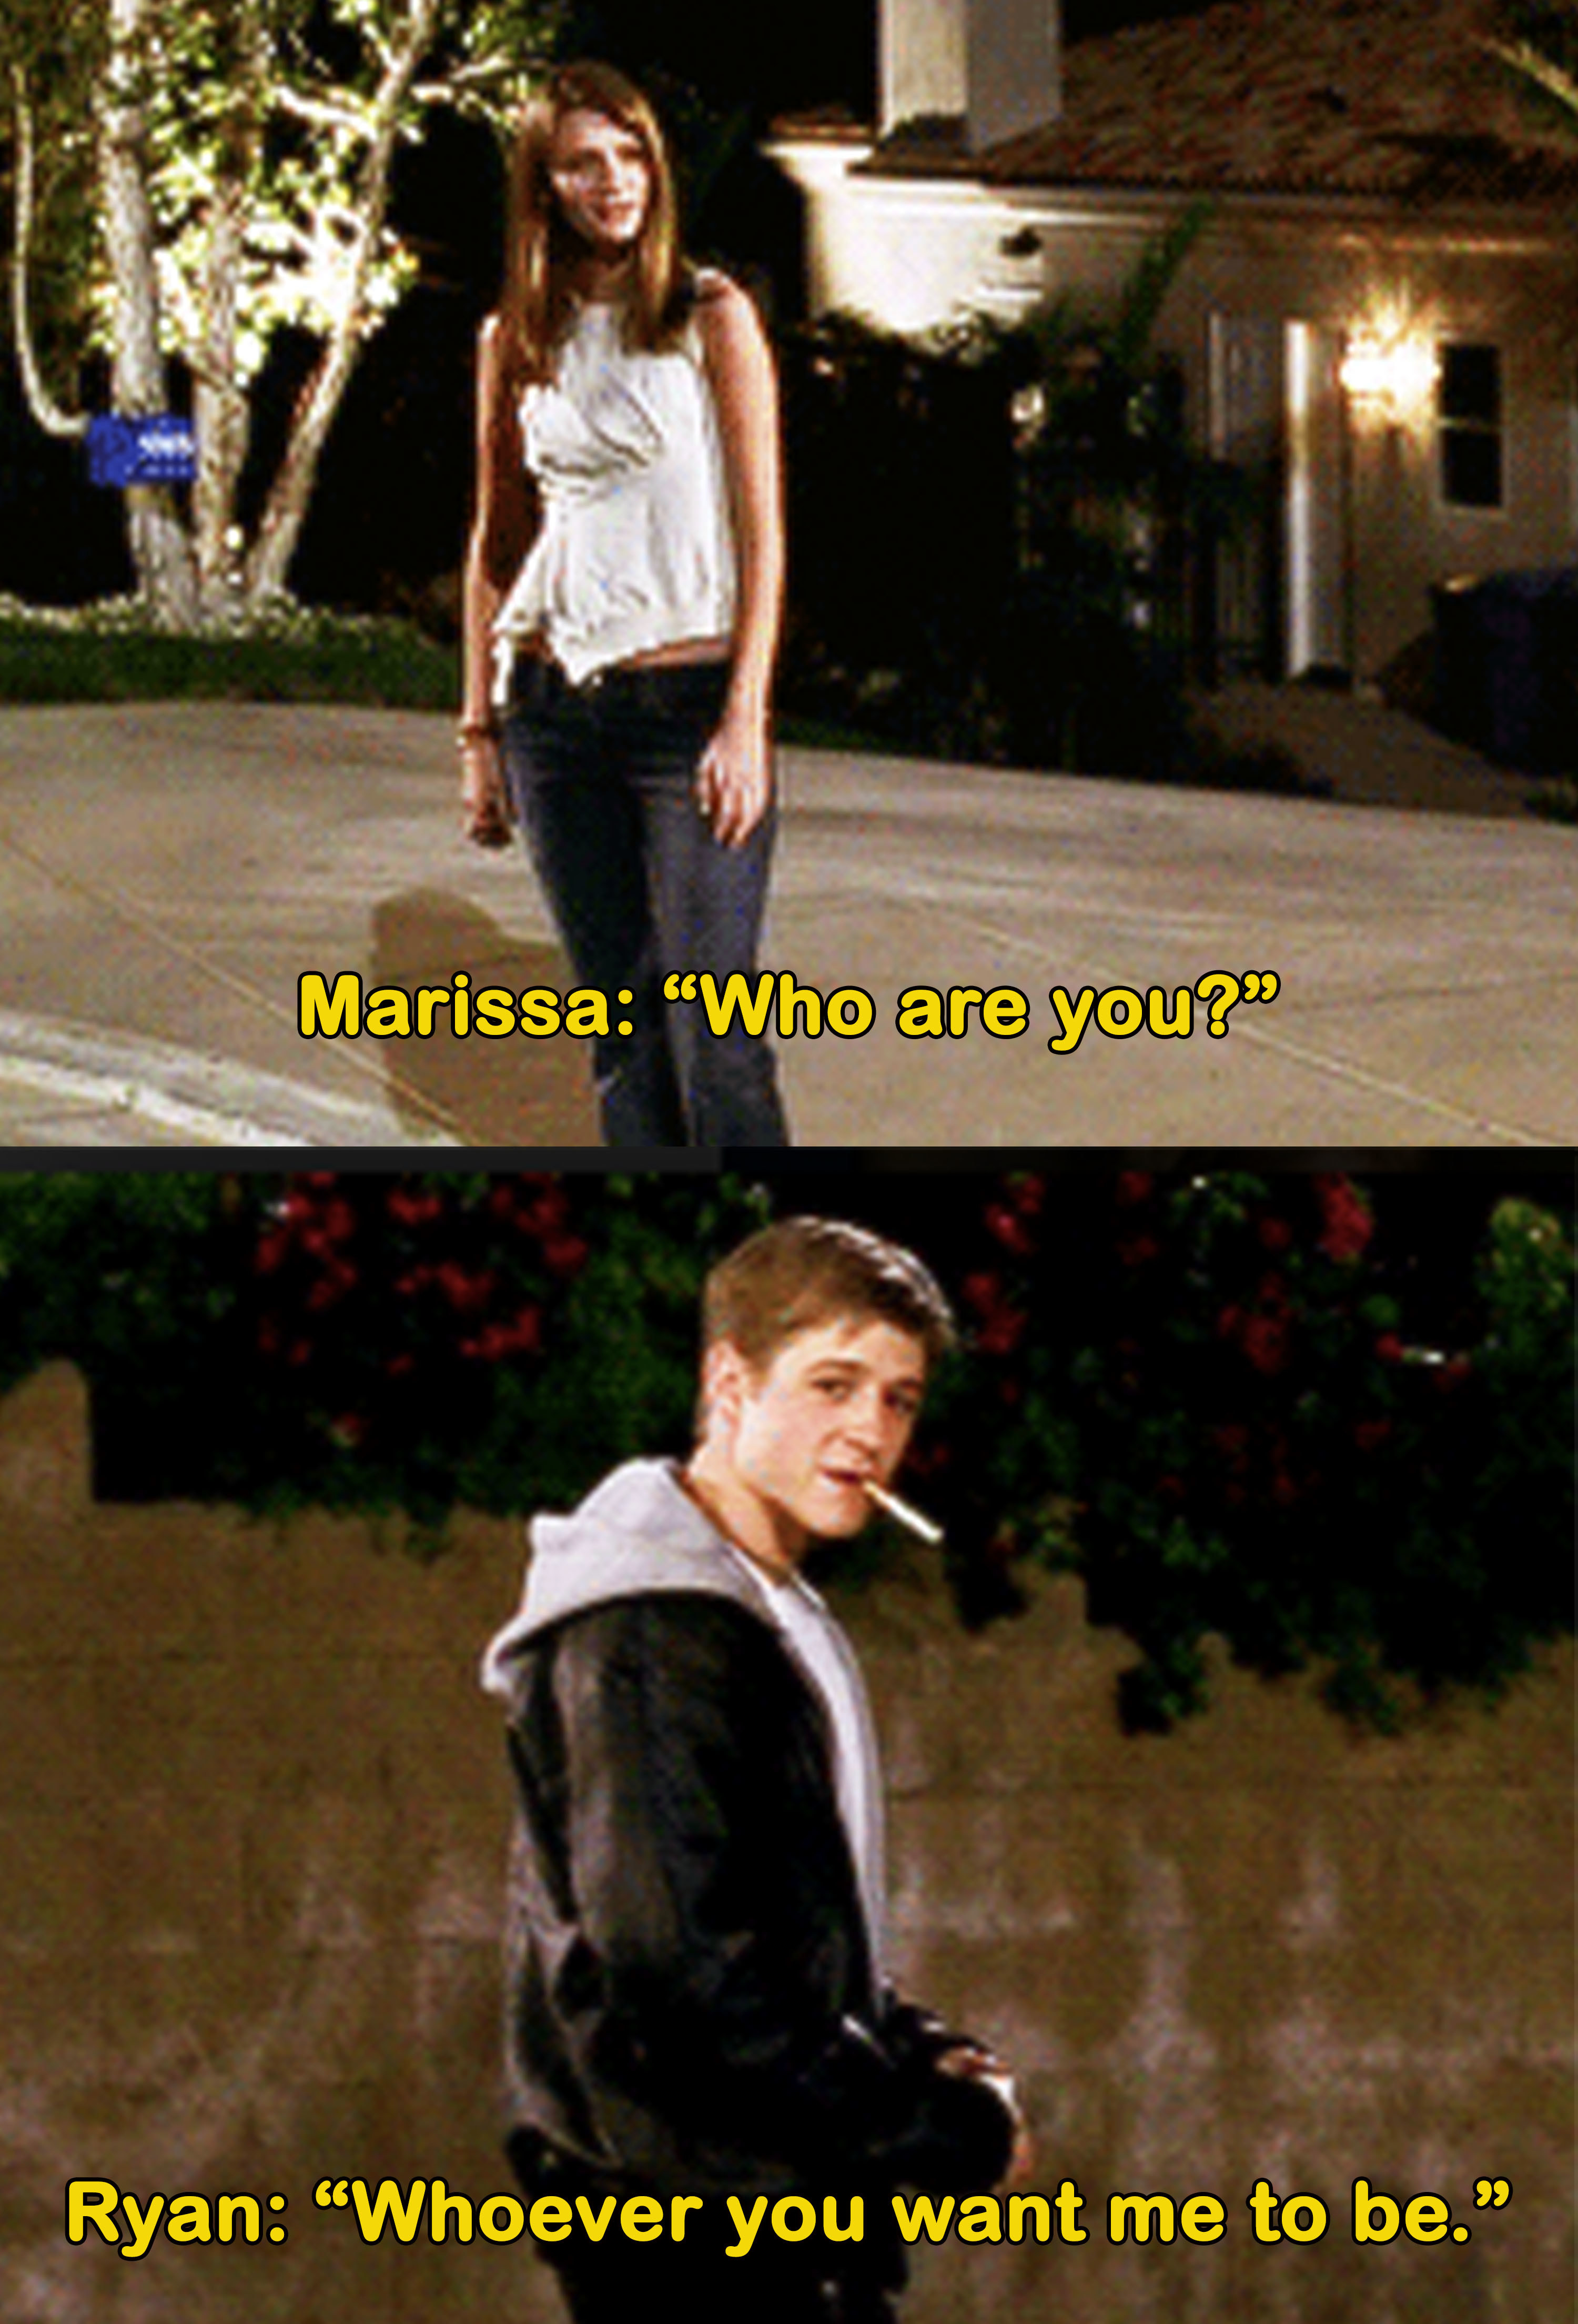 Marissa asks Ryan who he is and he responds, &quot;Whoever you want me to be&quot;